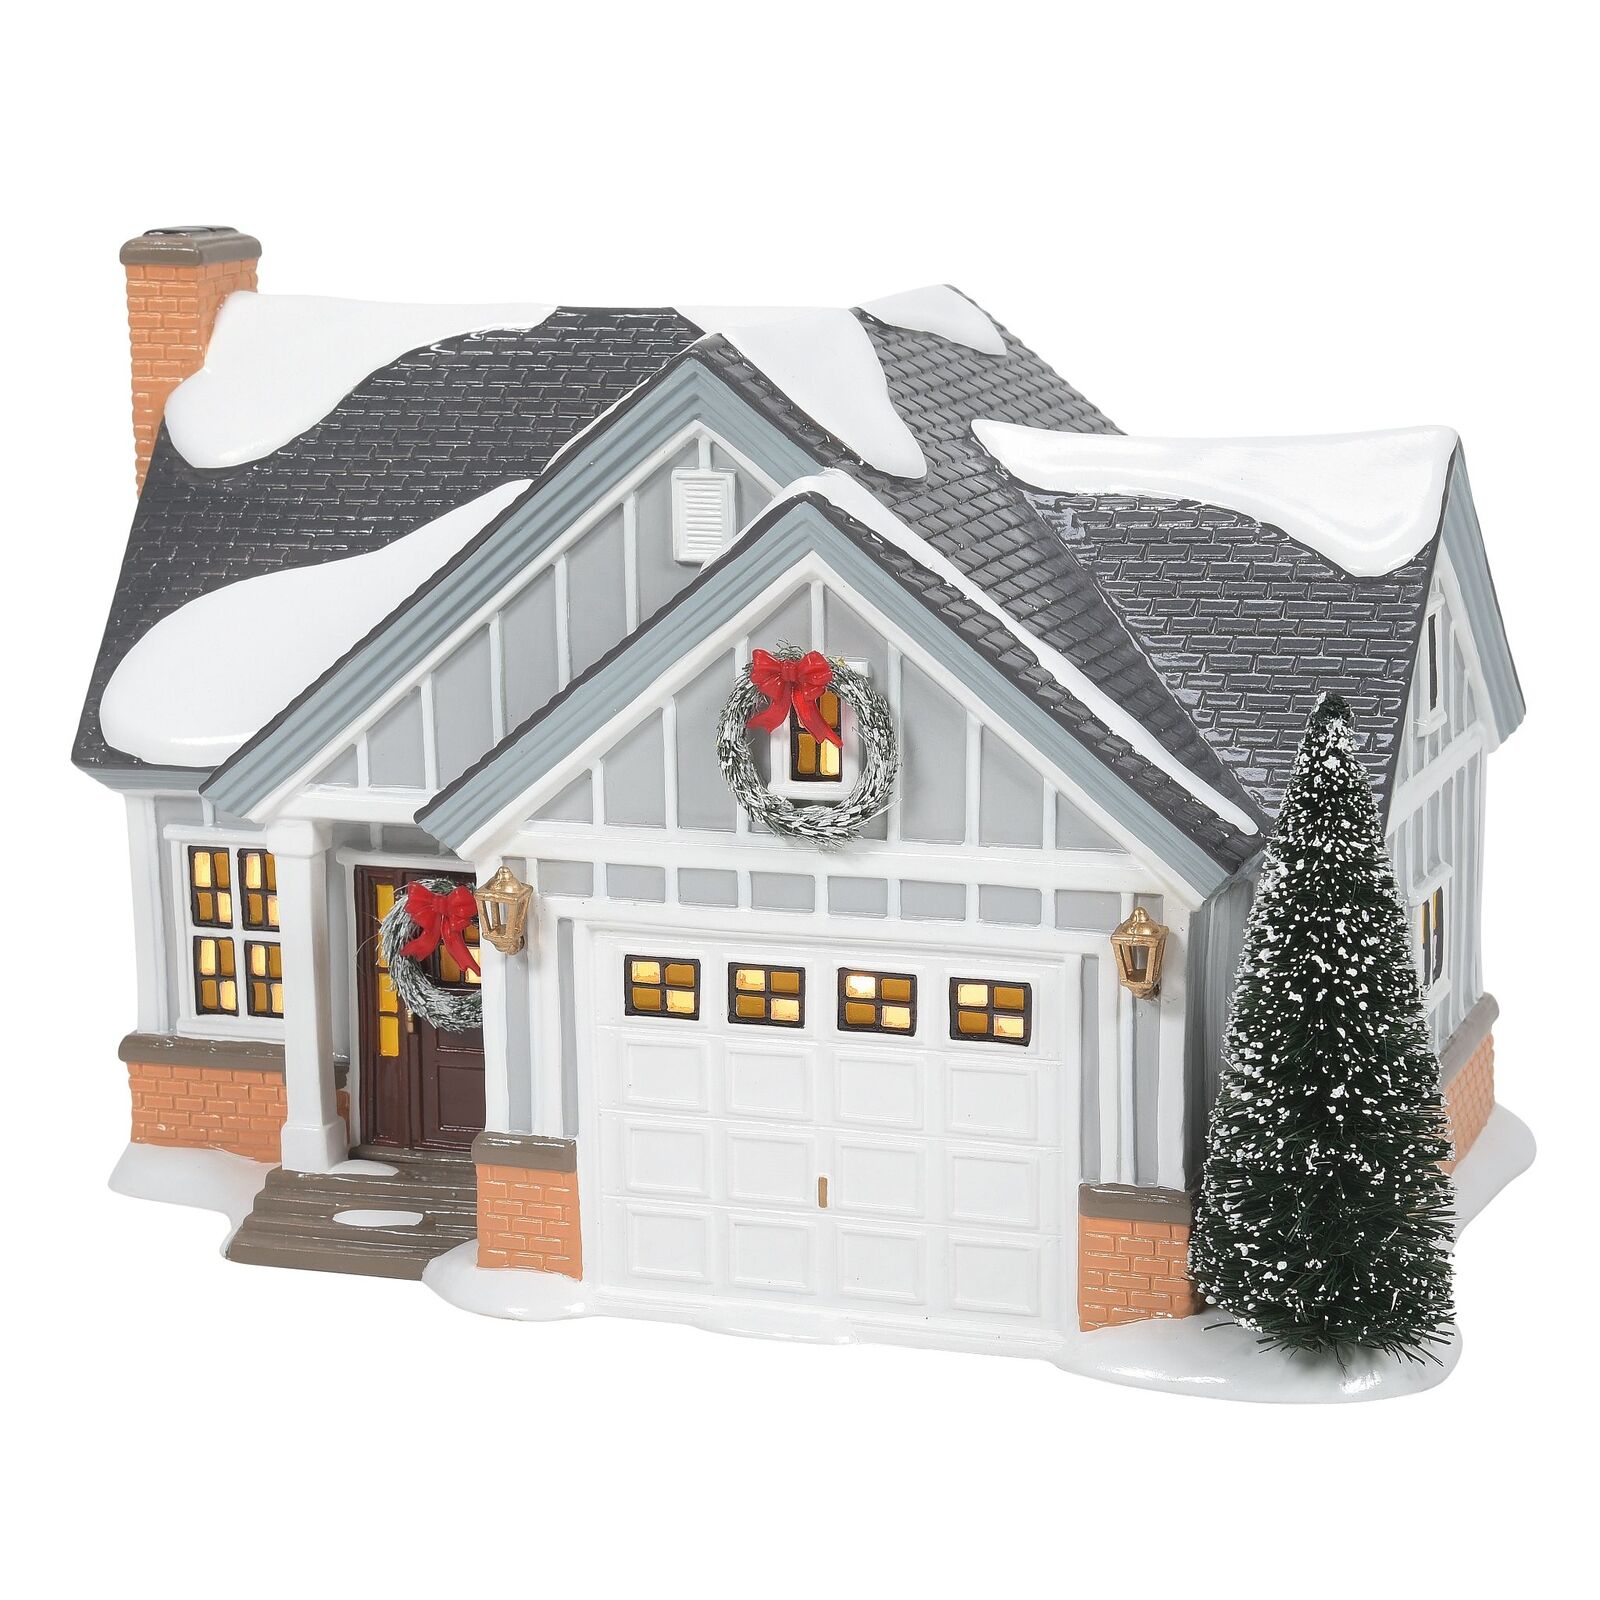 Department 56 Snow Village Holiday Starter Home Lit Building 6.89 Inch